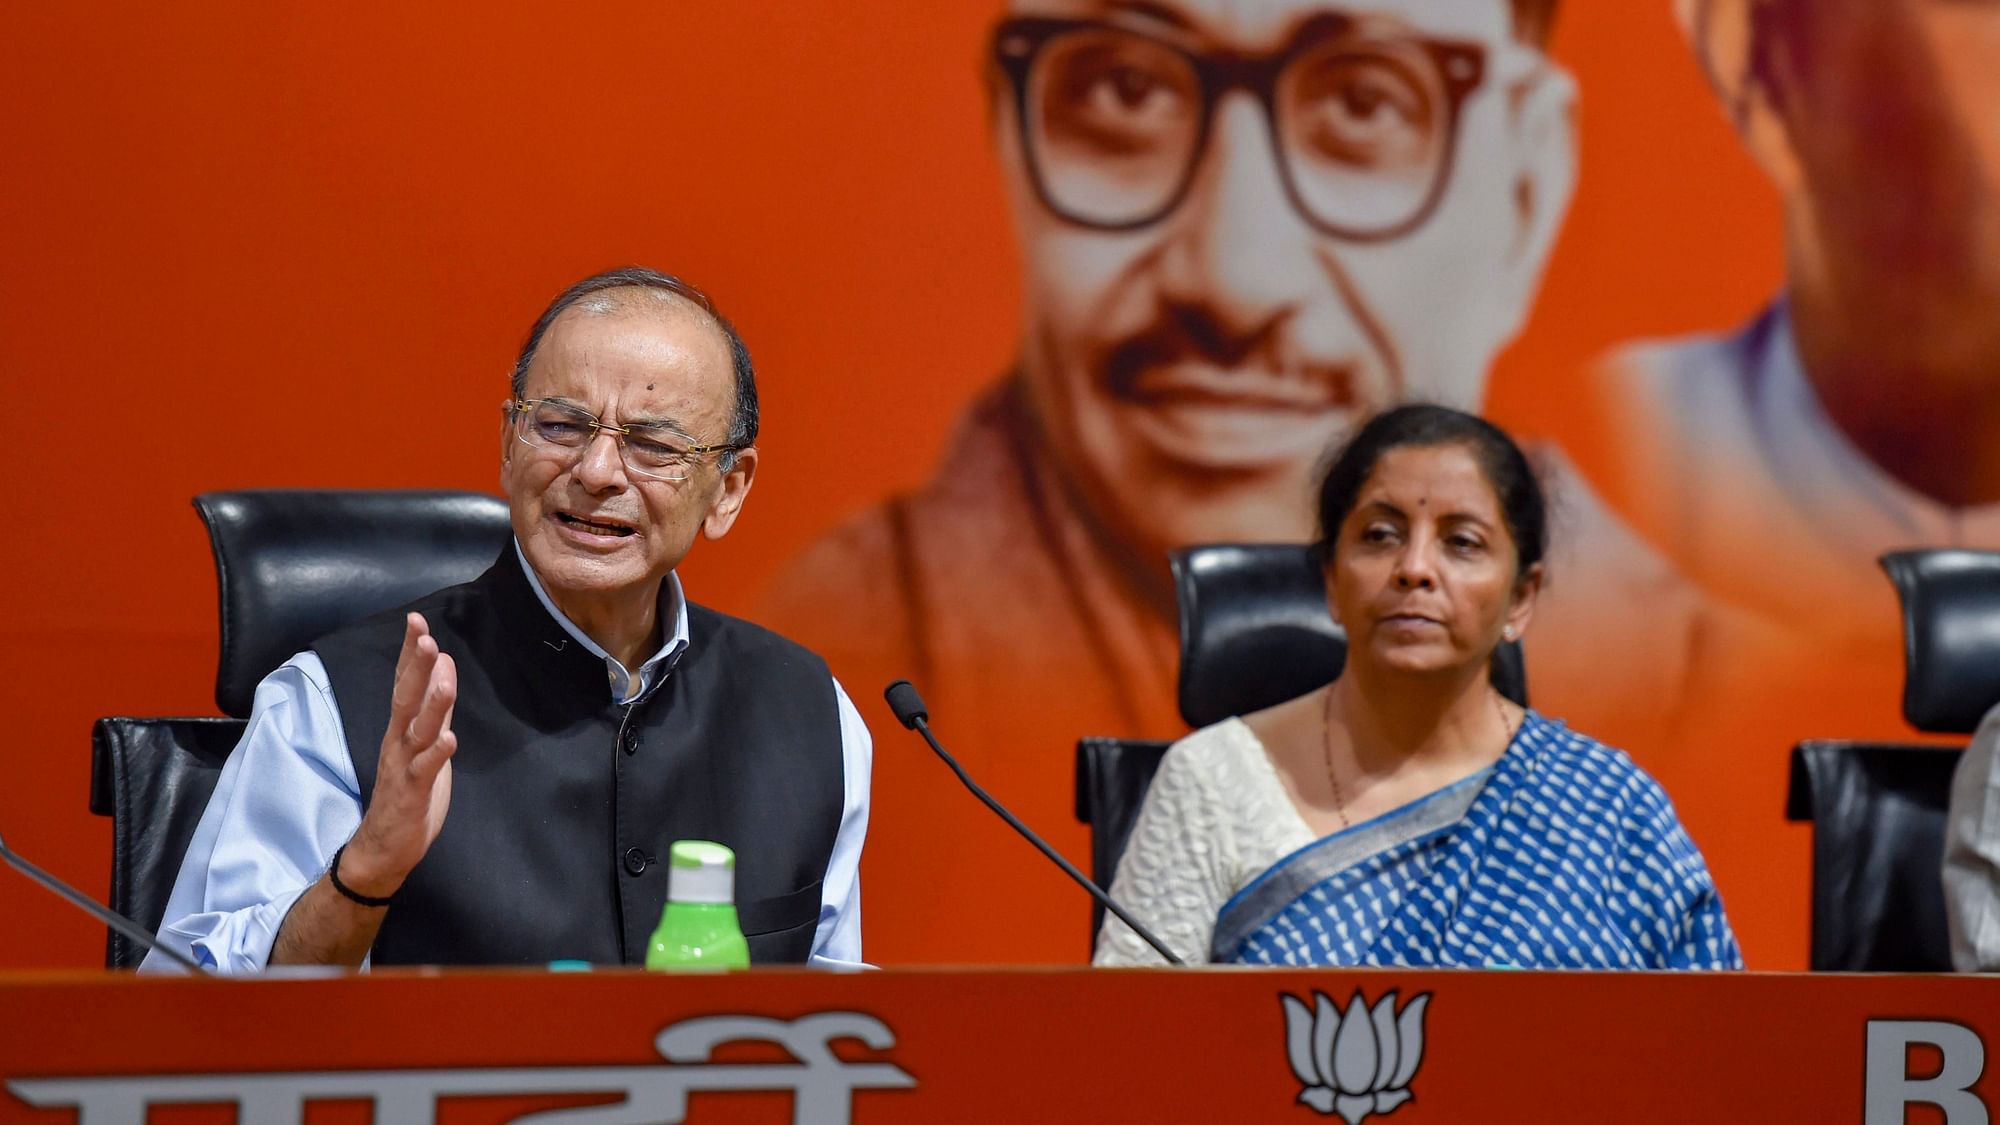 Arun Jaitley said that people cannot tolerate an entire community being labelled as terrorists.